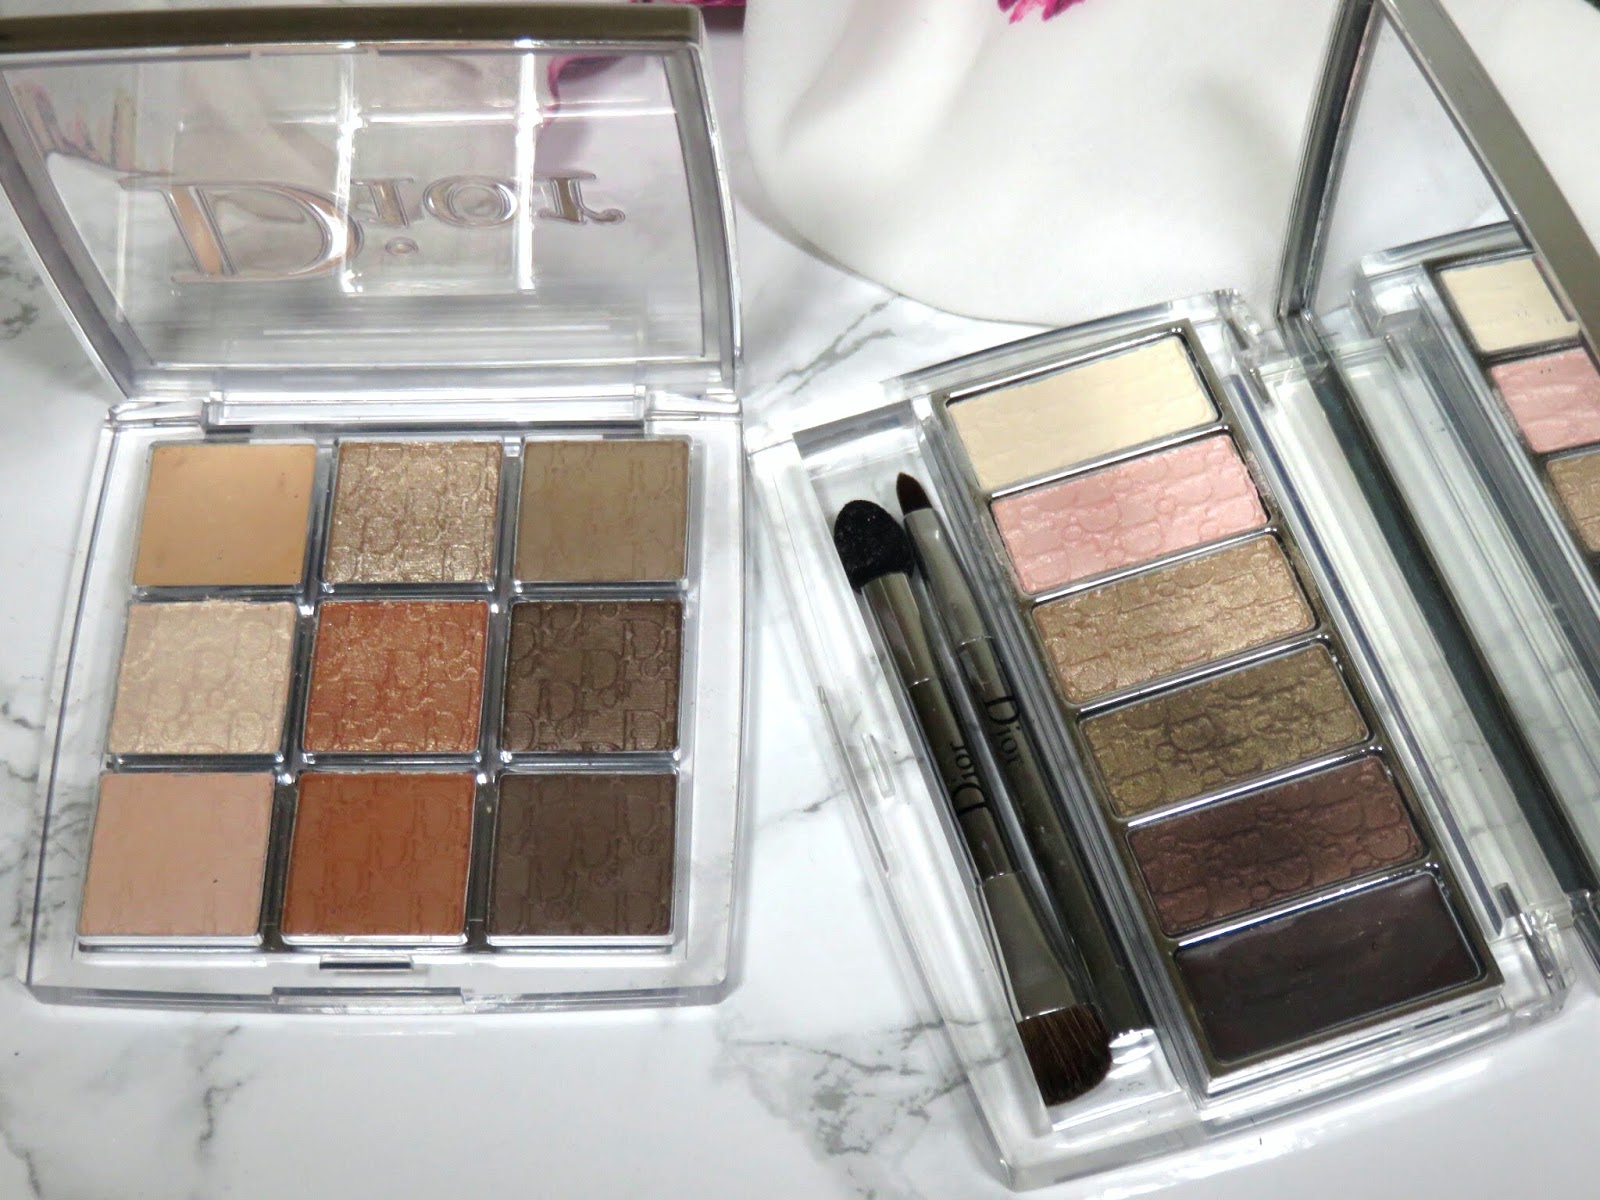 Review | Dior Backstage Collection Eyeshadow Palette in Cool 